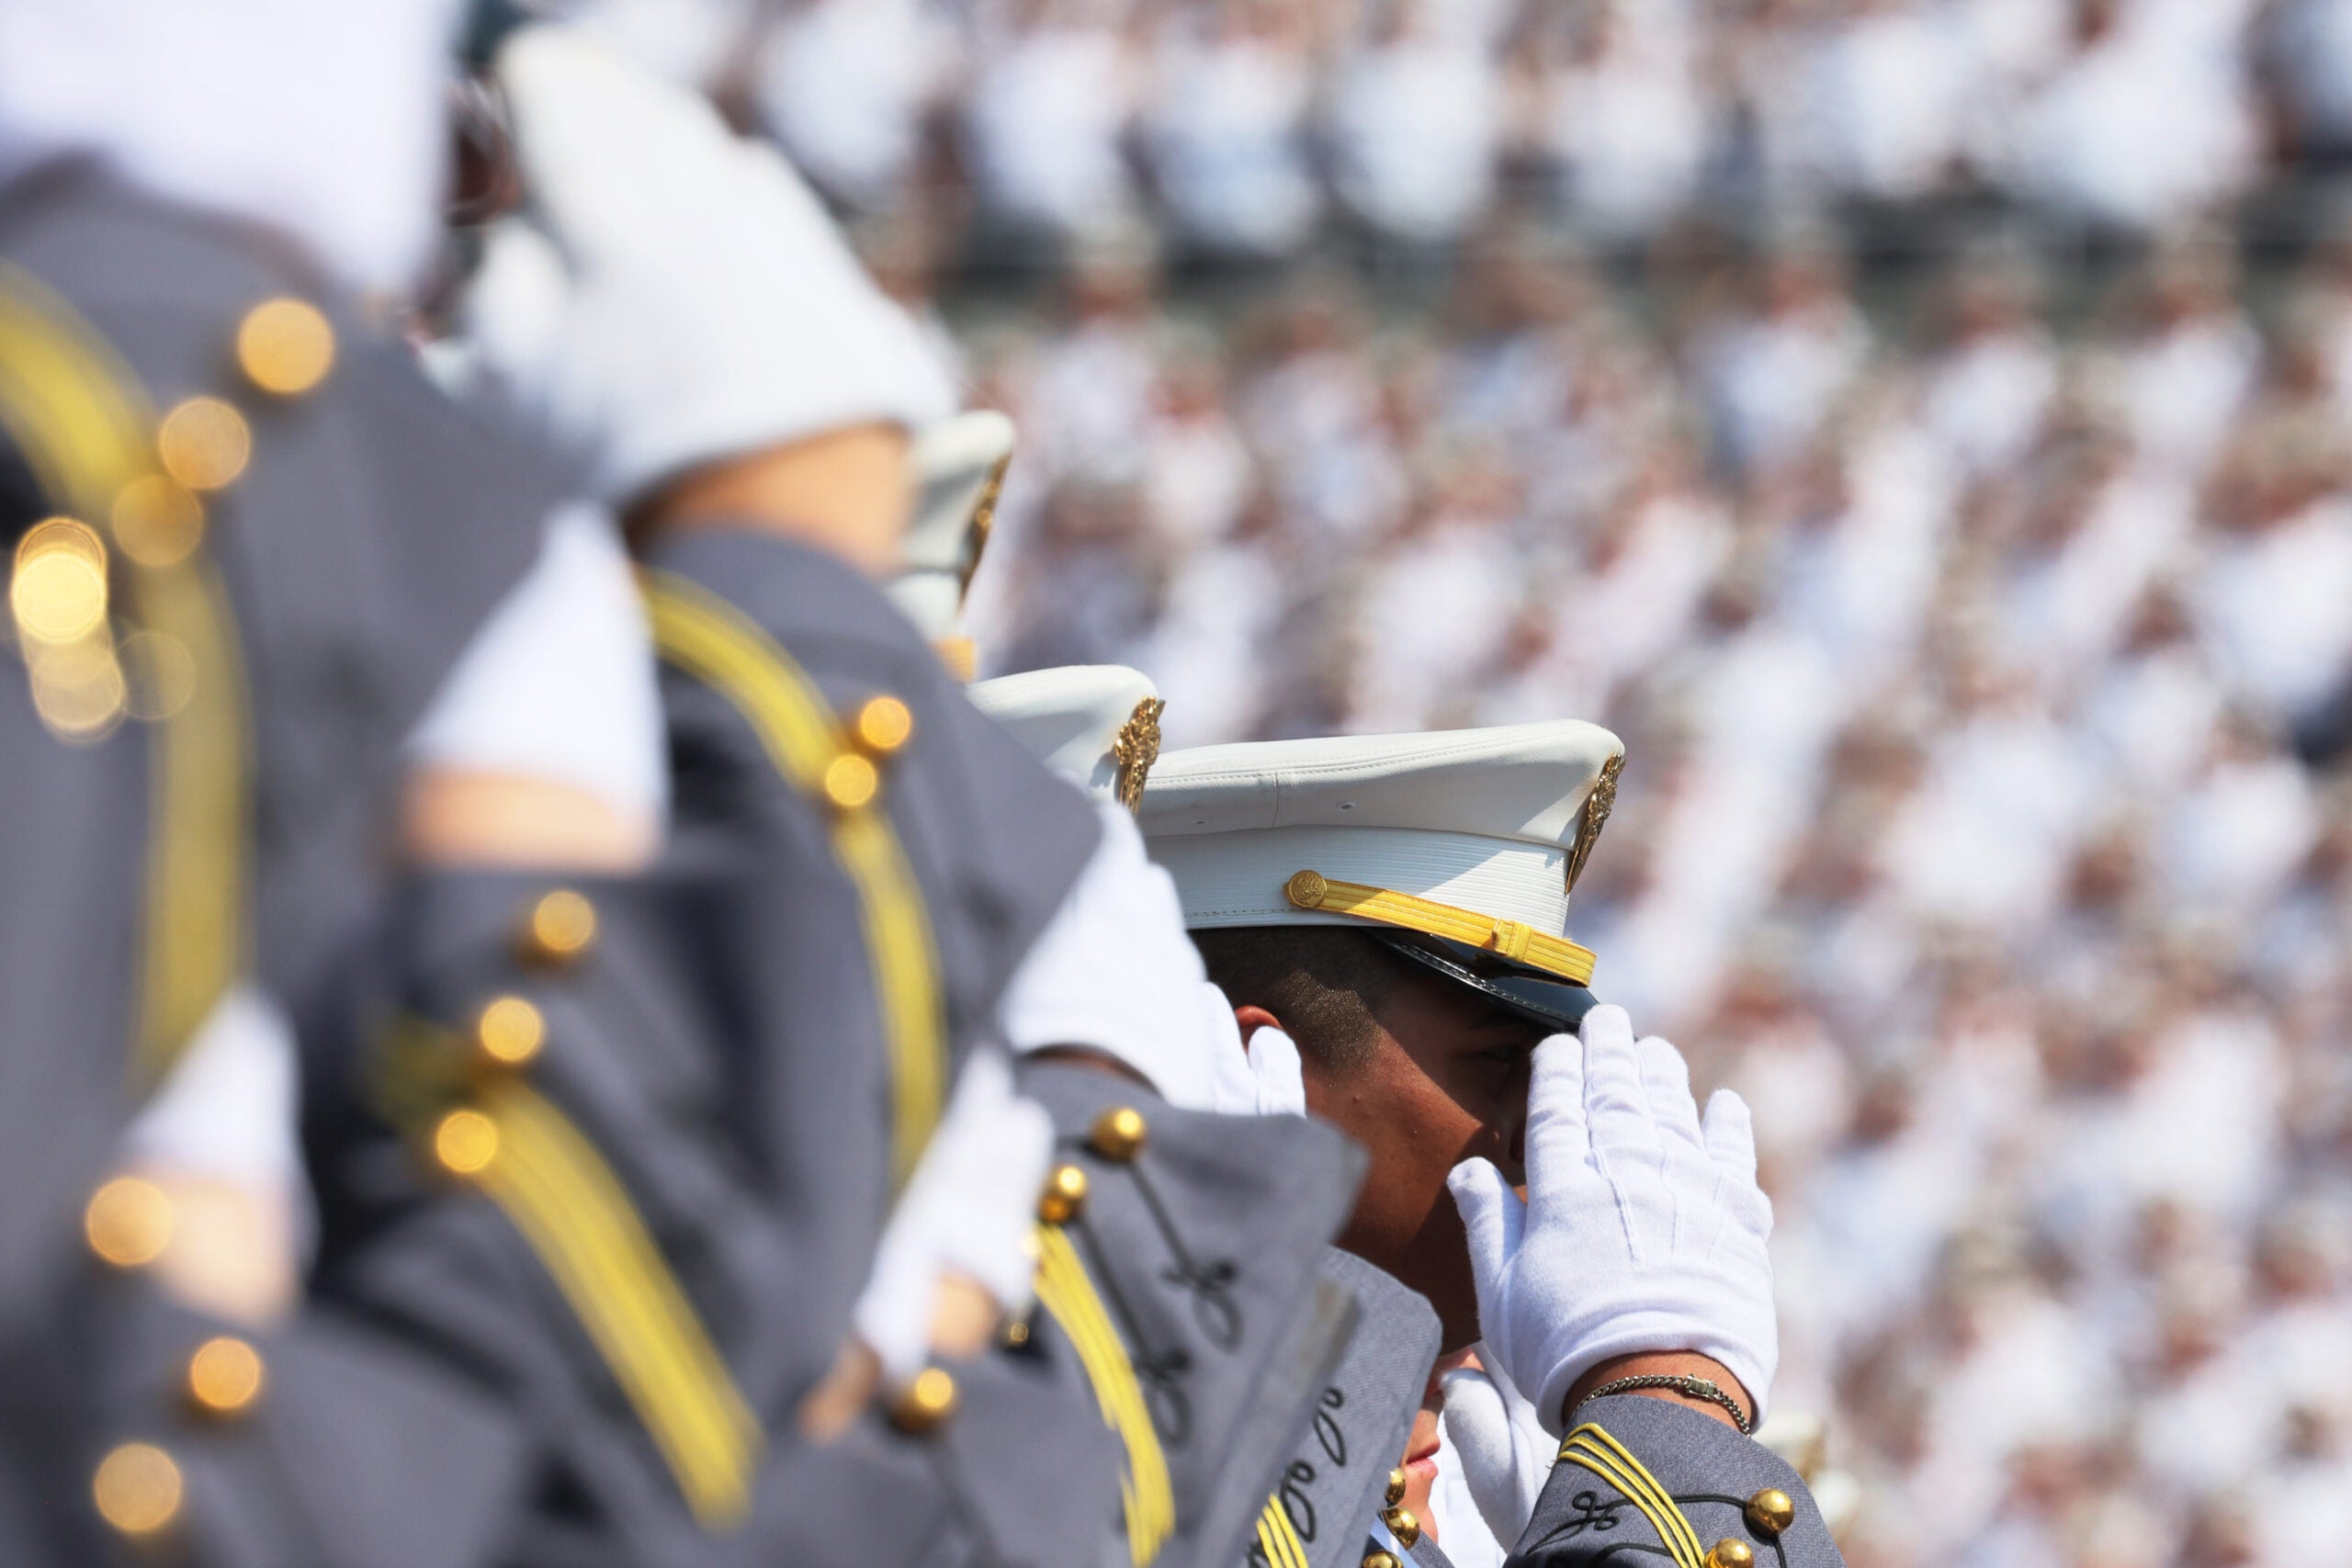 WEST POINT, NEW YORK - MAY 21:  West Point graduates stand and salute as the National Anthem is played during the 2022 West Point Commencement Ceremony at West Point Military Academy on May 21, 2022 in West Point, New York. Mark A. Milley, Chairman of the Joint Chiefs of Staff, delivered the graduation address to the 1014 cadets of the U.S. Military Academy’s Class of 2022.  (Photo by Michael M. Santiago/Getty Images)